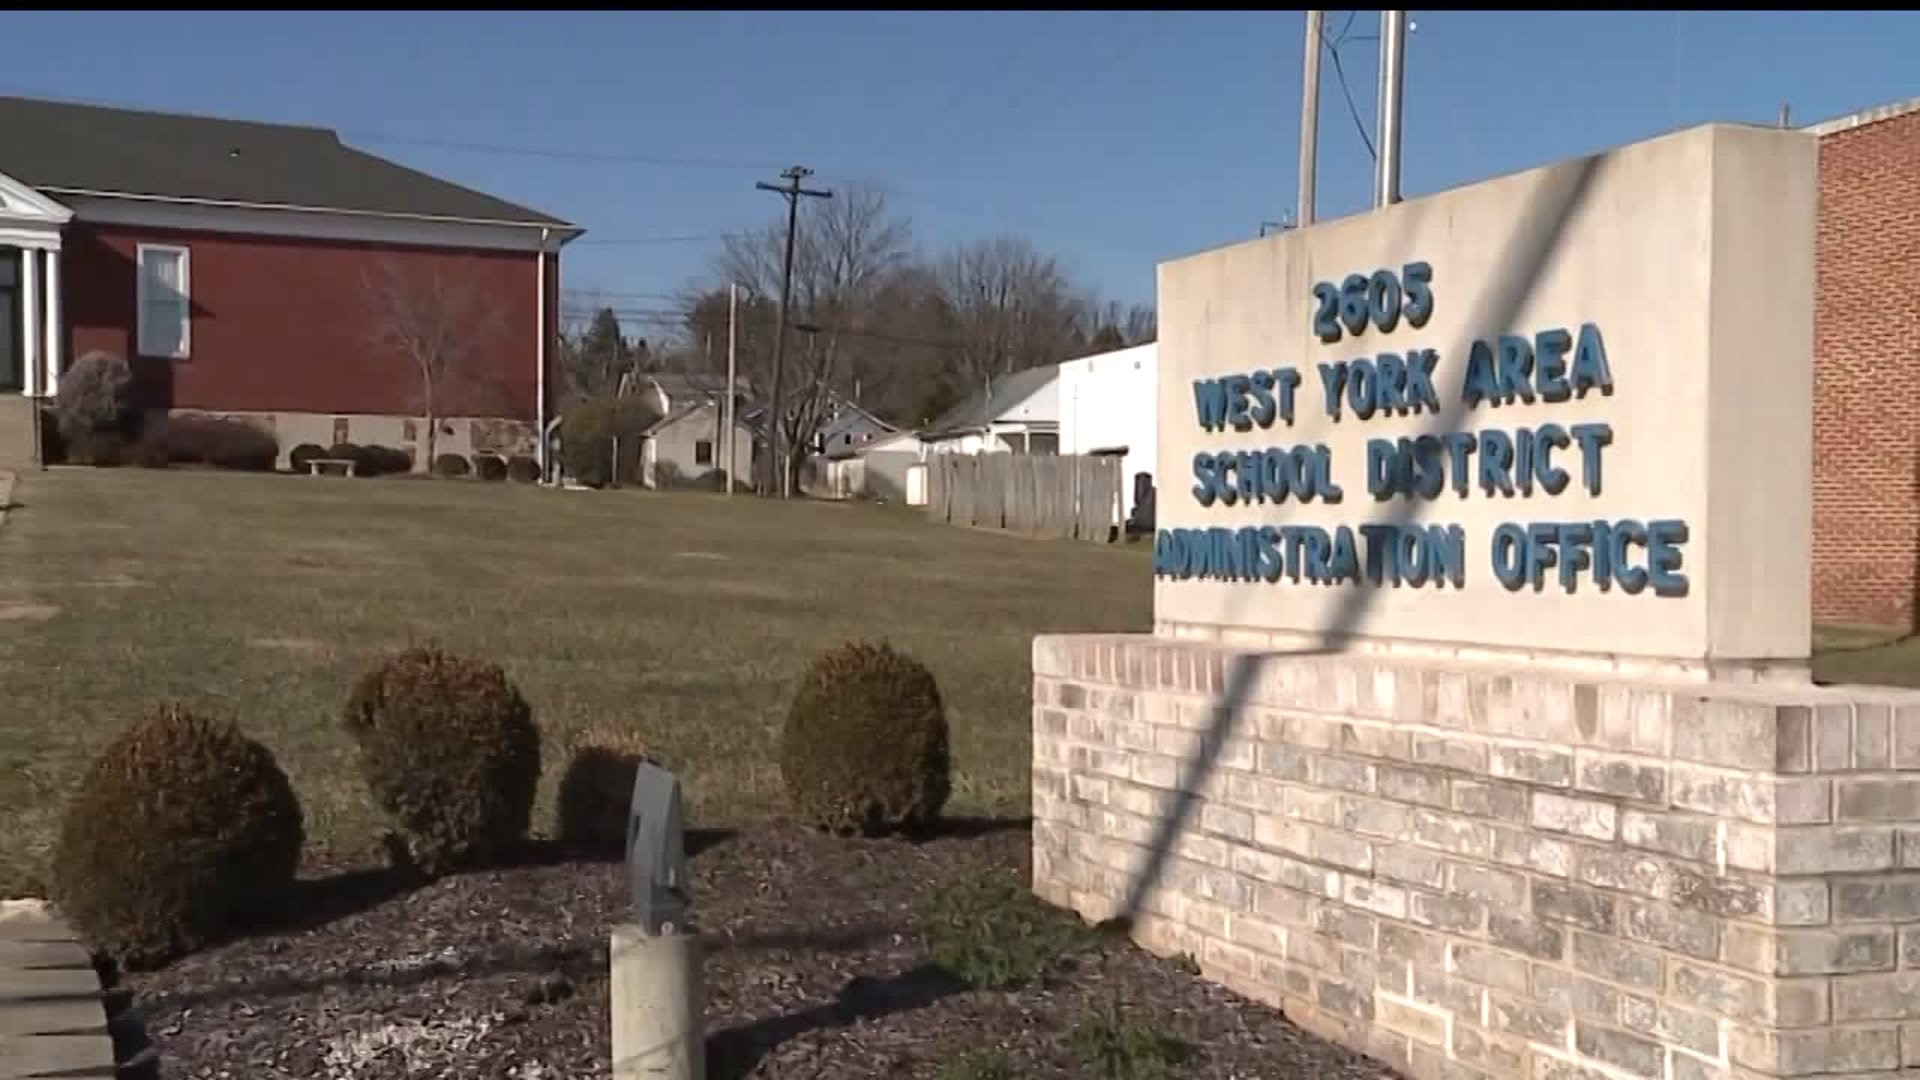 West York School District bullying could lead to lawsuit